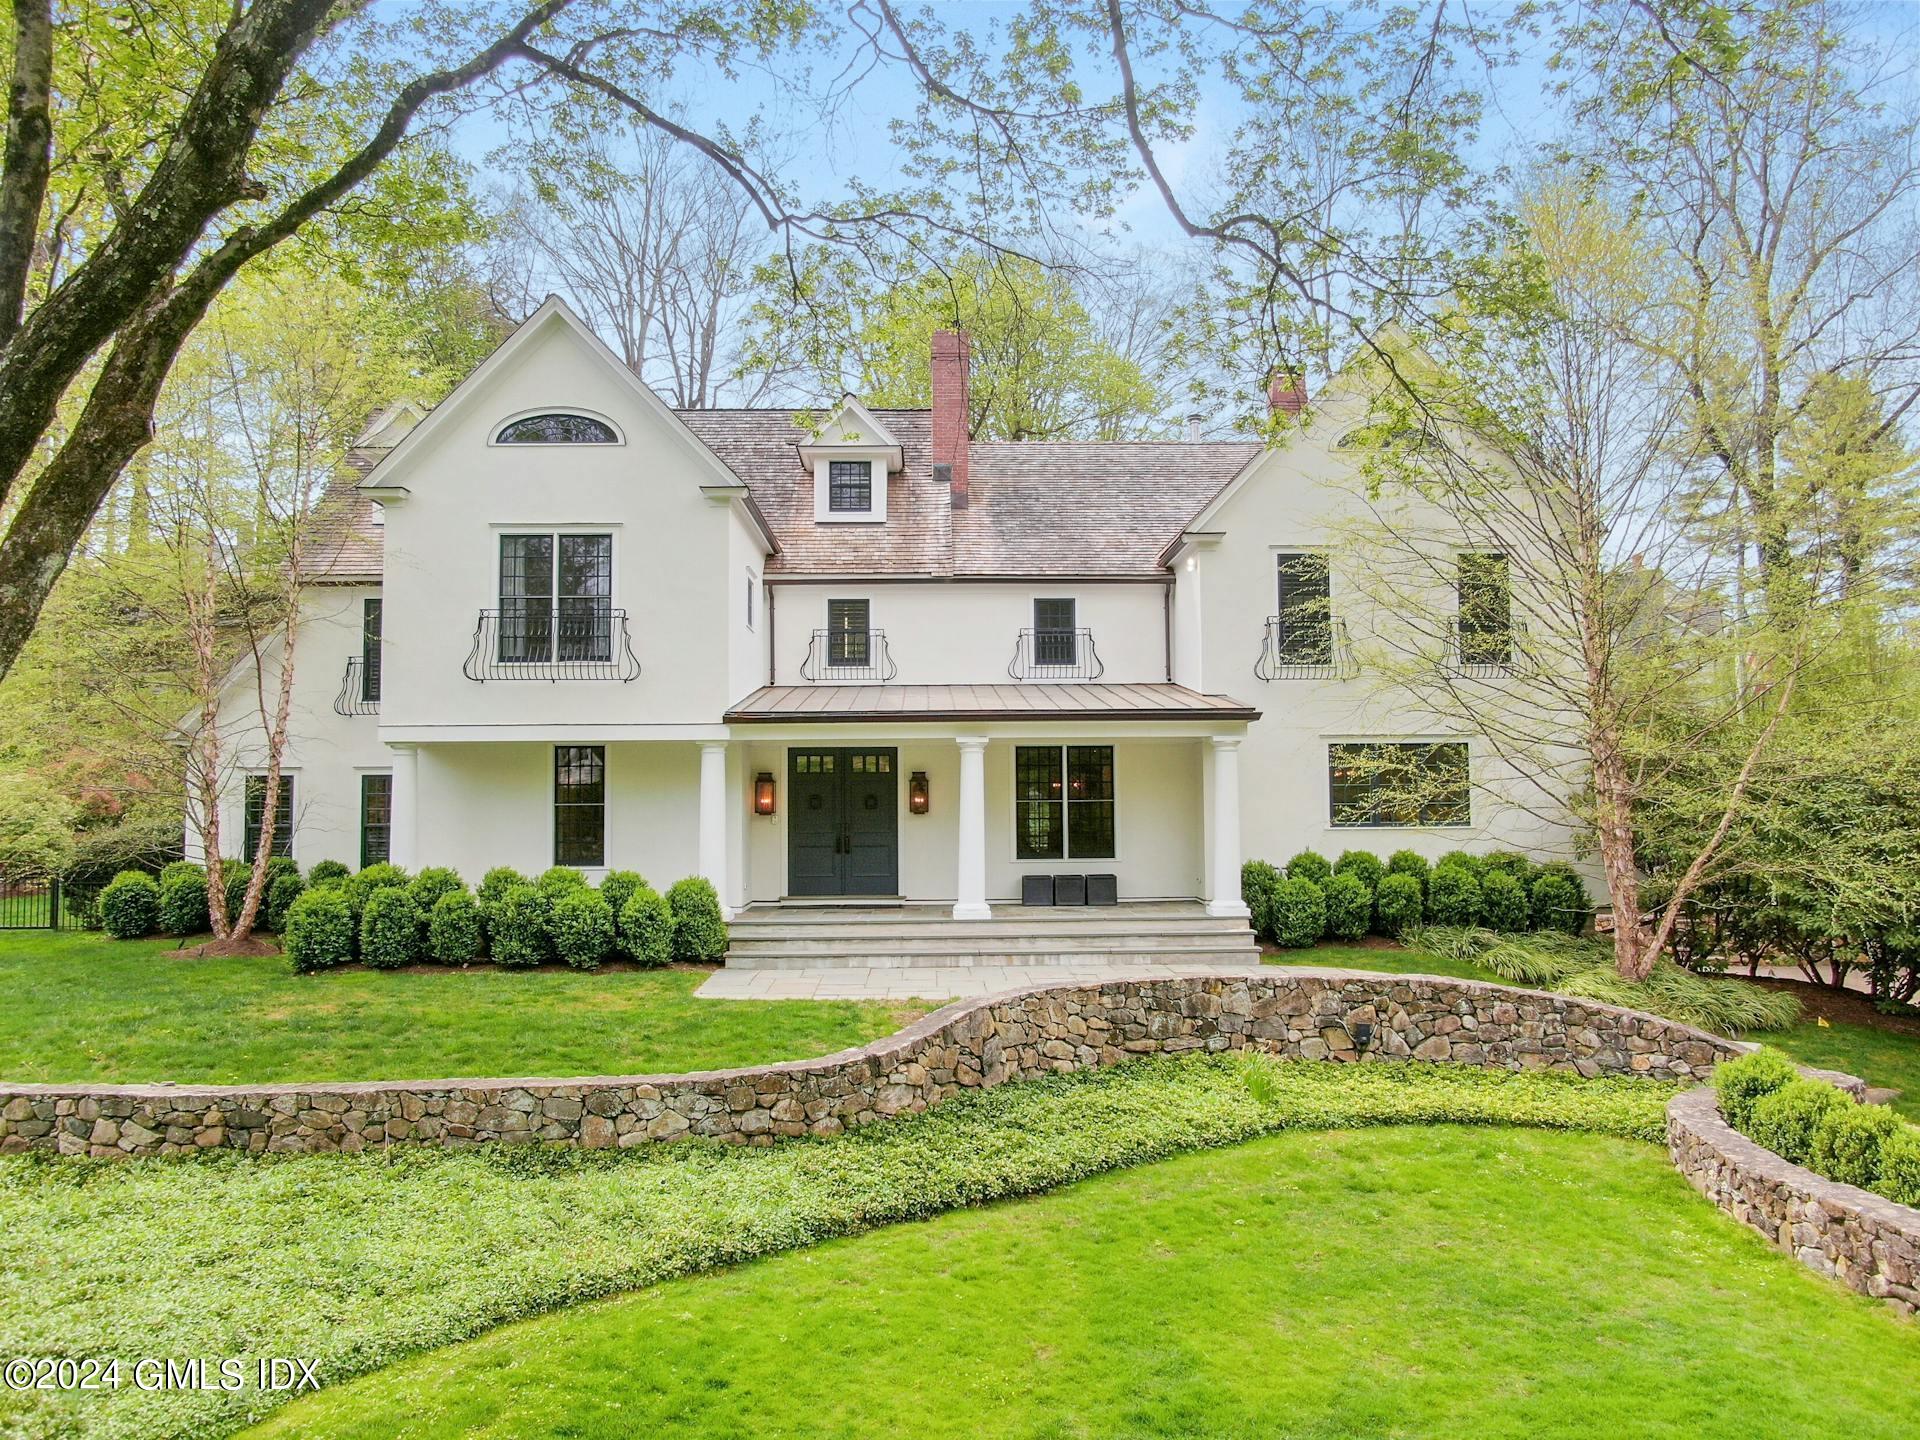 156 Old Church Road, Greenwich, Connecticut - 5 Bedrooms  
7 Bathrooms - 